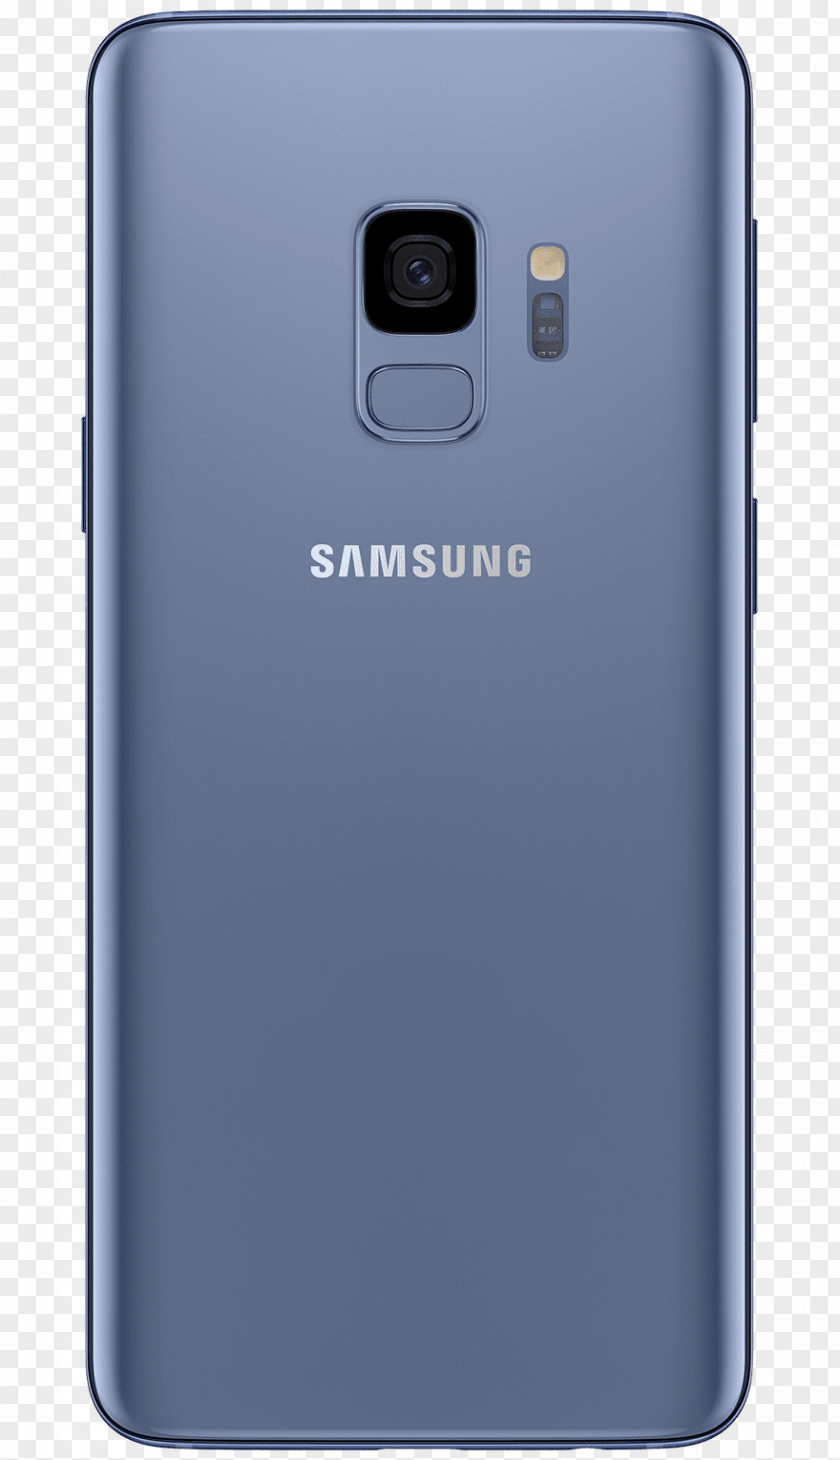 Samsung Galaxy S8 Coral Blue Android Telephone PNG